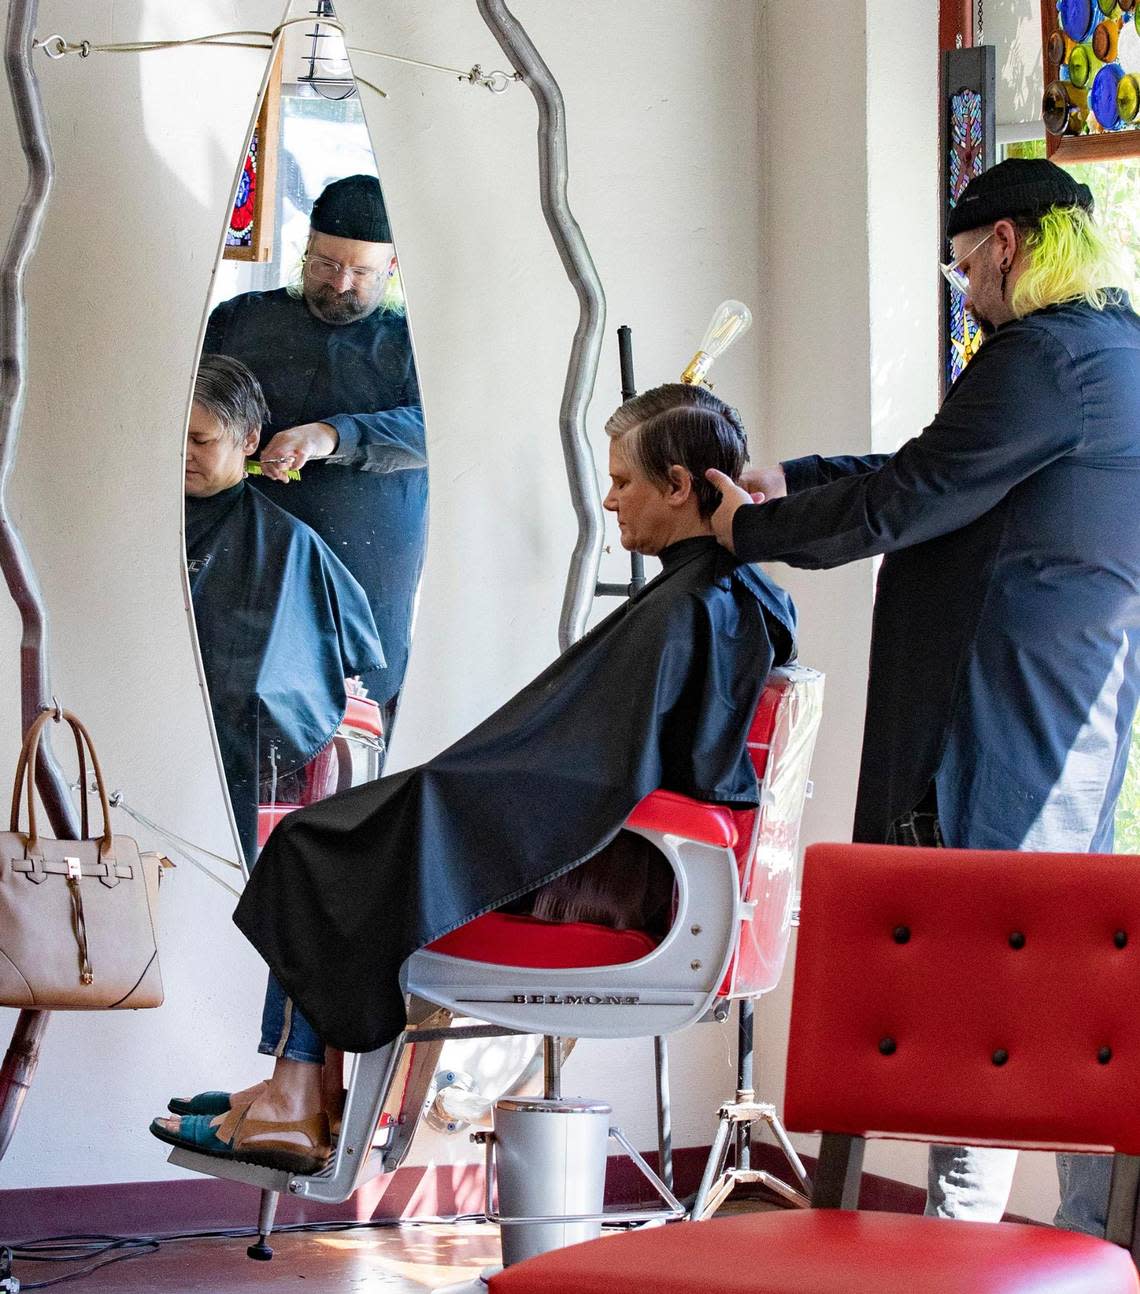 Stylist Richard McDade cuts a client’s hair at Magnolia Ave. Salon in Fort Worth, Texas, on Saturday, Sept. 10, 2022.